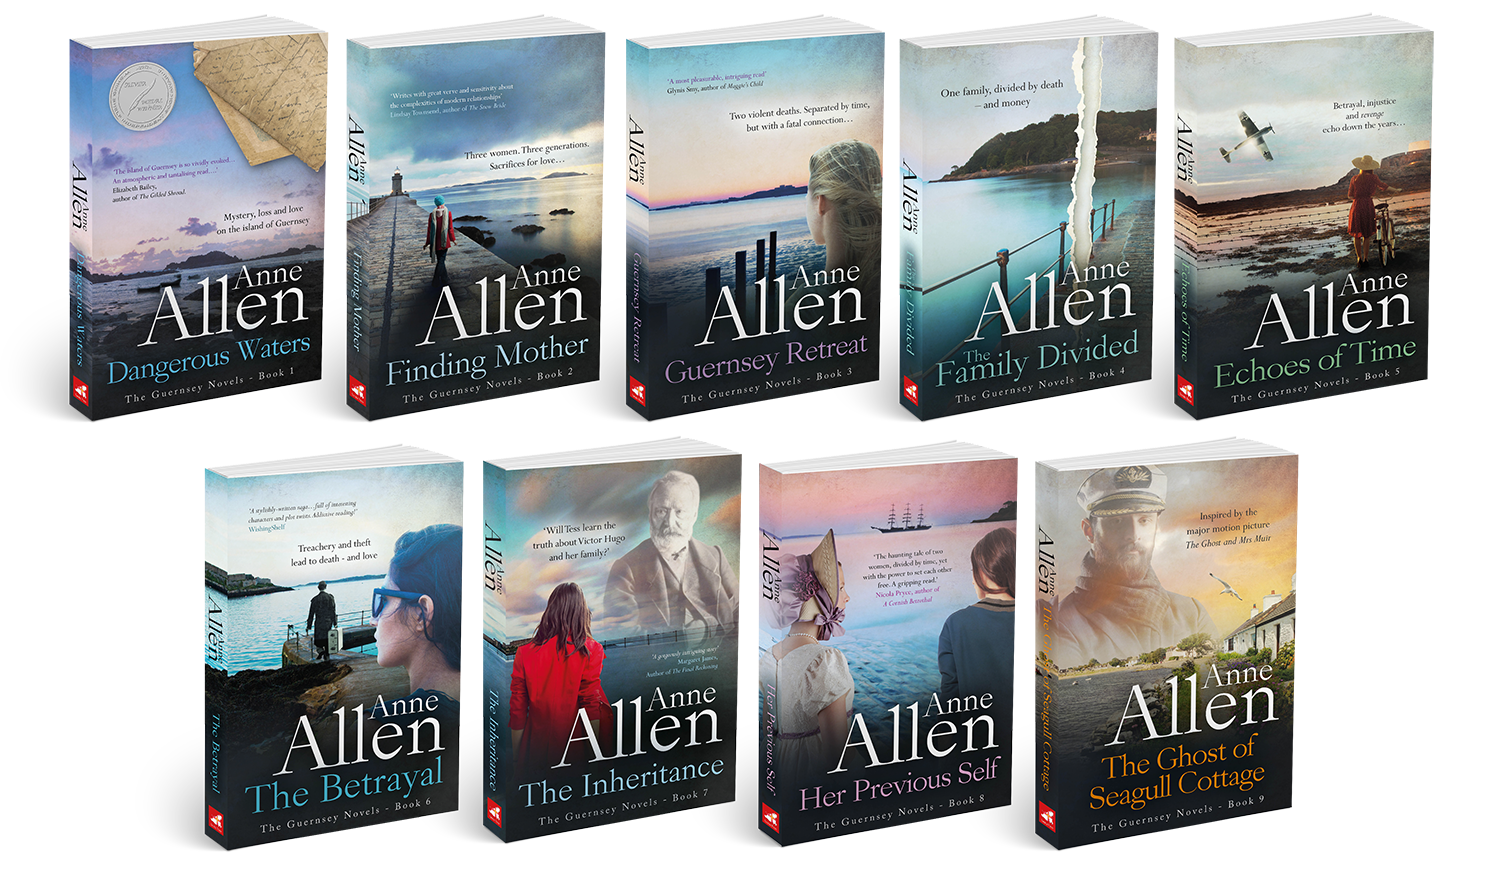 The Guernsey Series